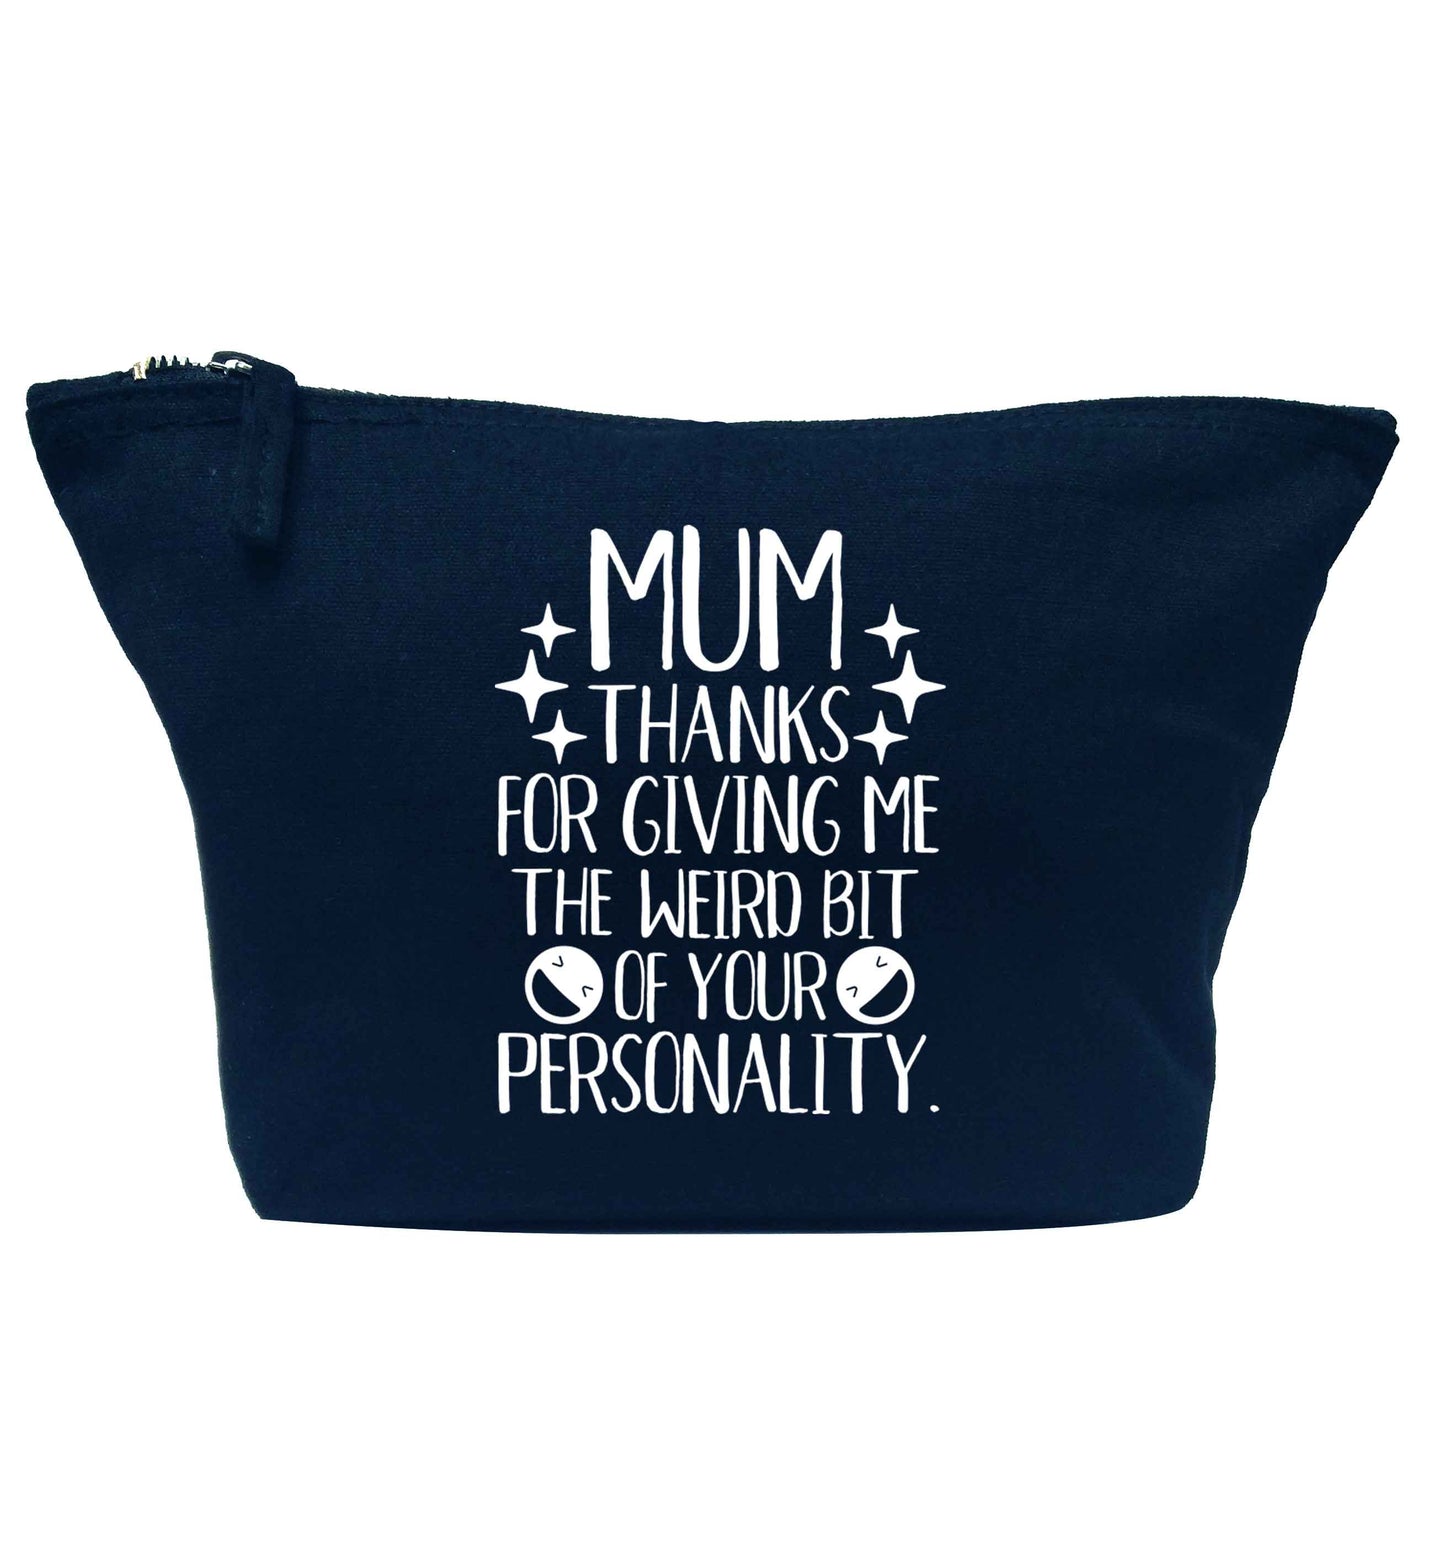 Mum thanks for giving me the weird bit of your personality navy makeup bag